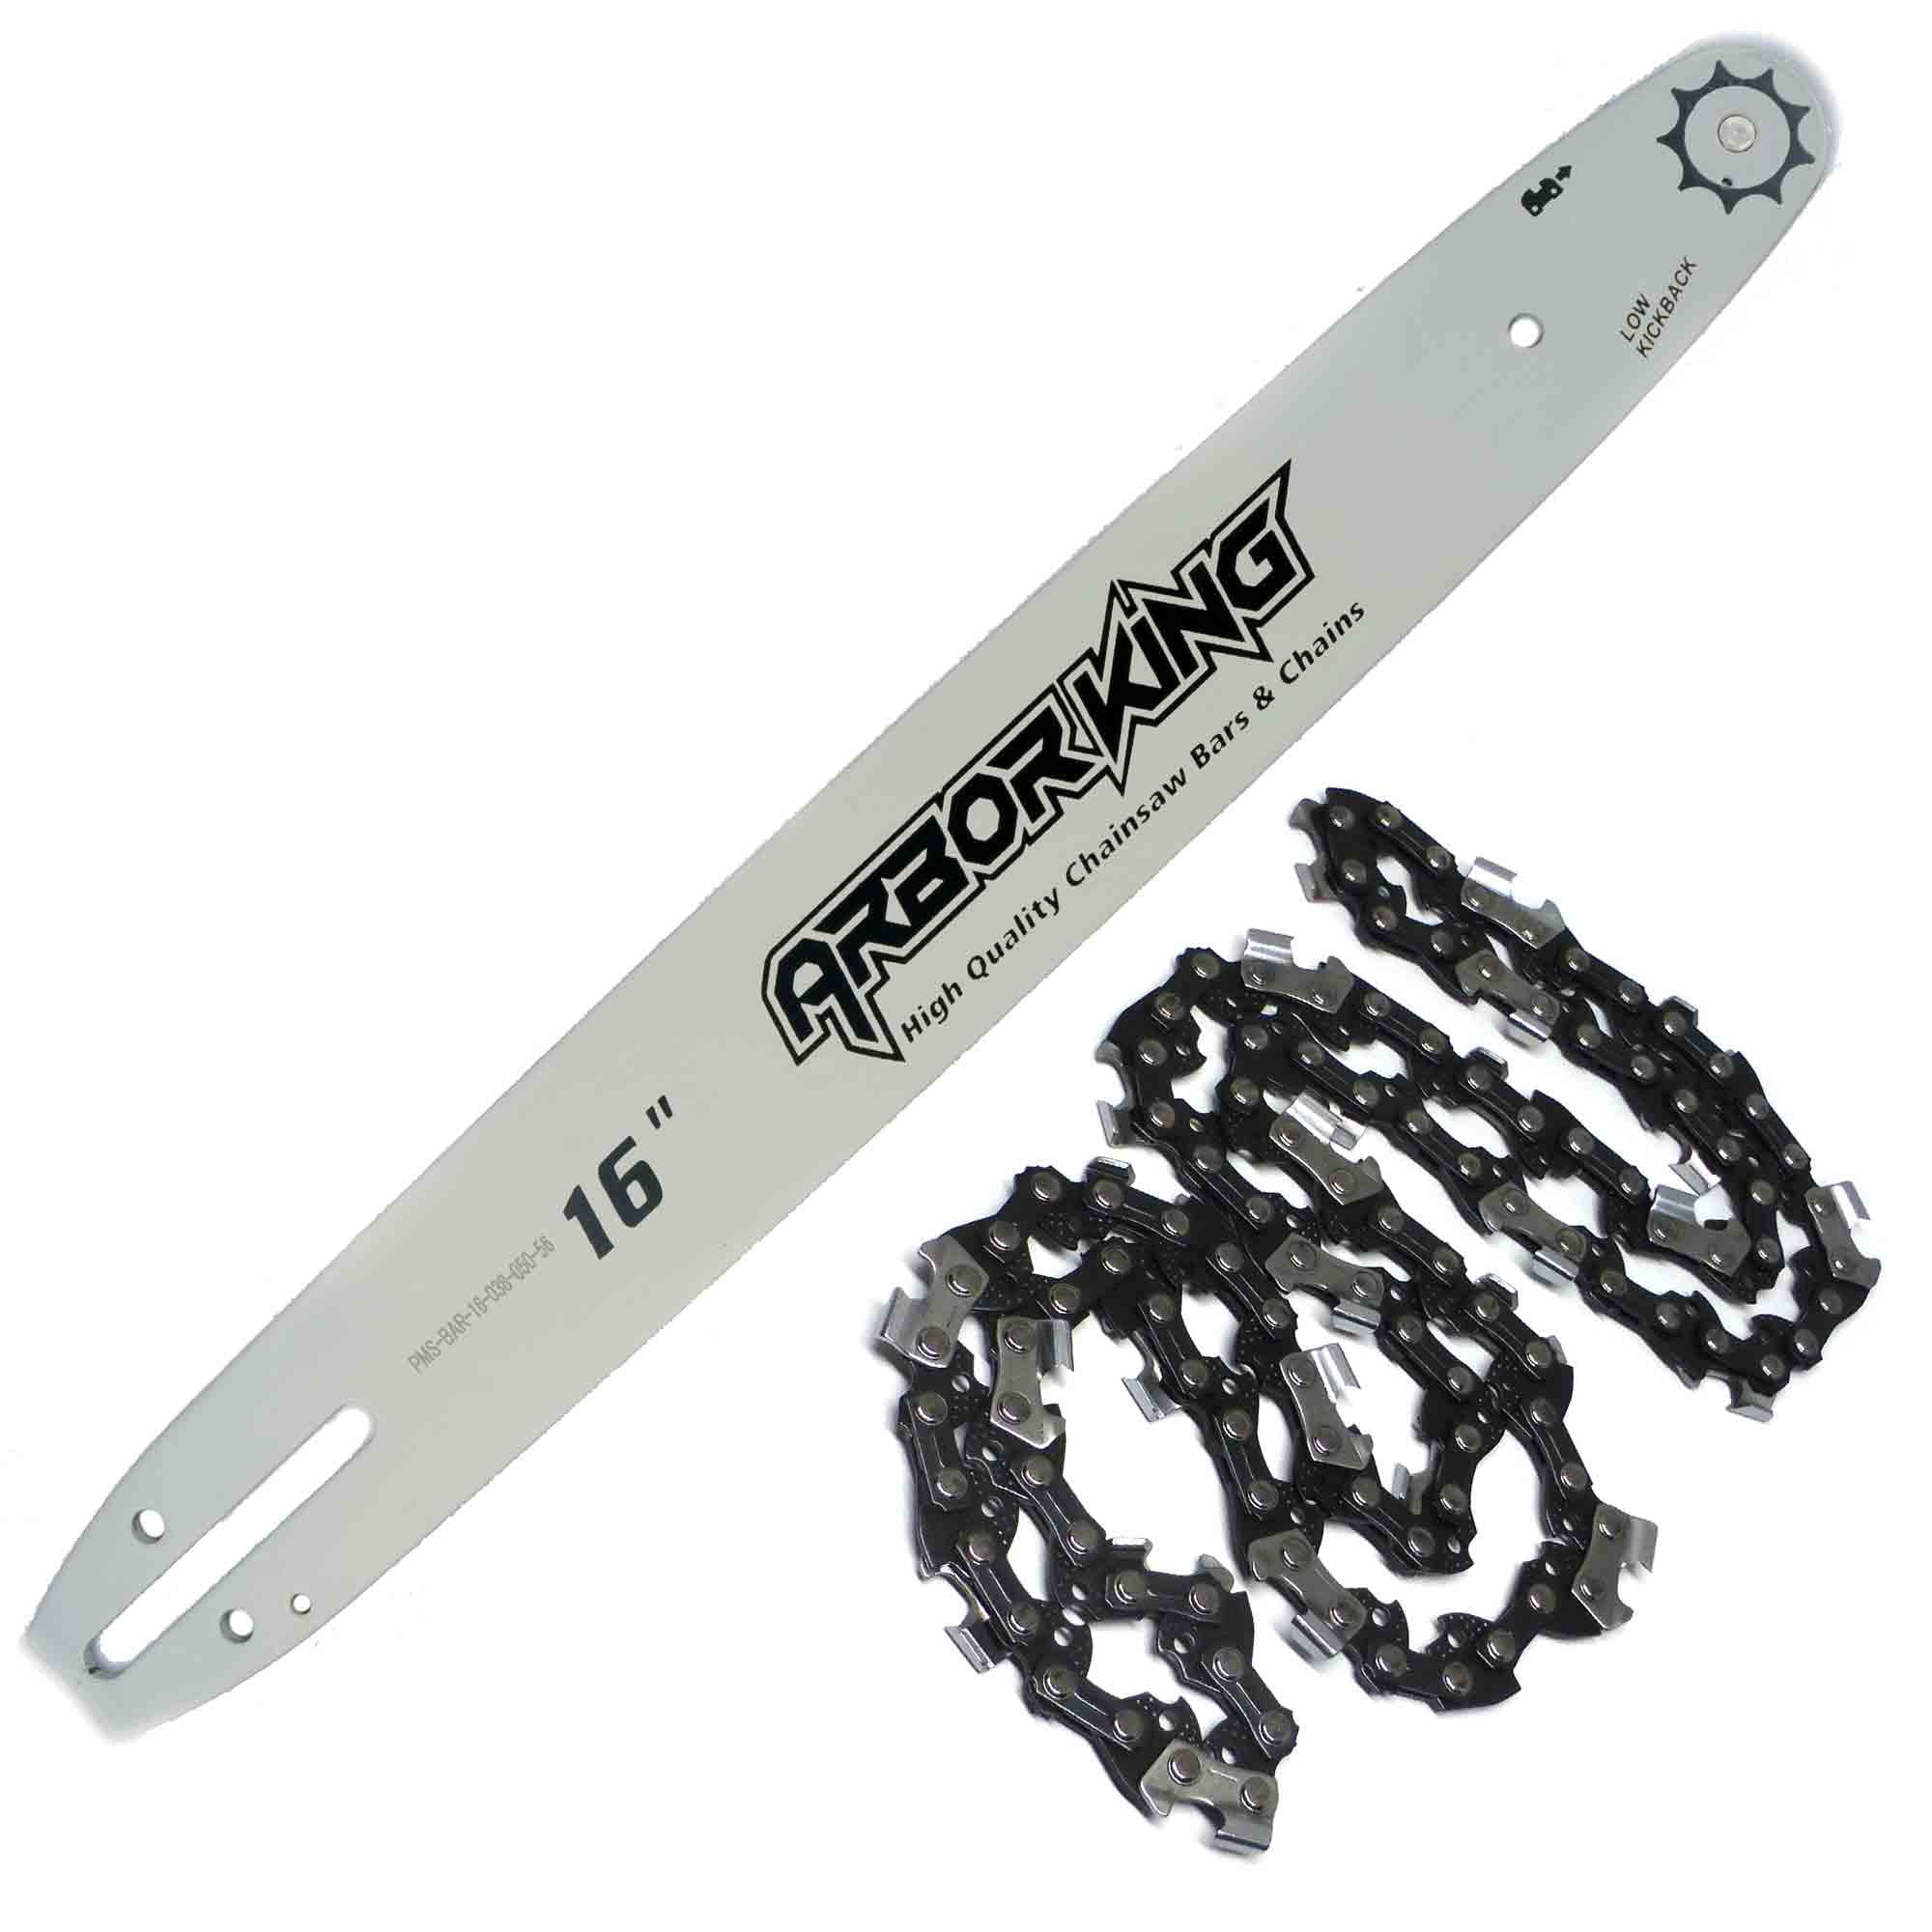 Details about   RedMax 591 06 26-72 Chainsaw 20" Guide Bar 3-8" Pitch .058" Gauge 